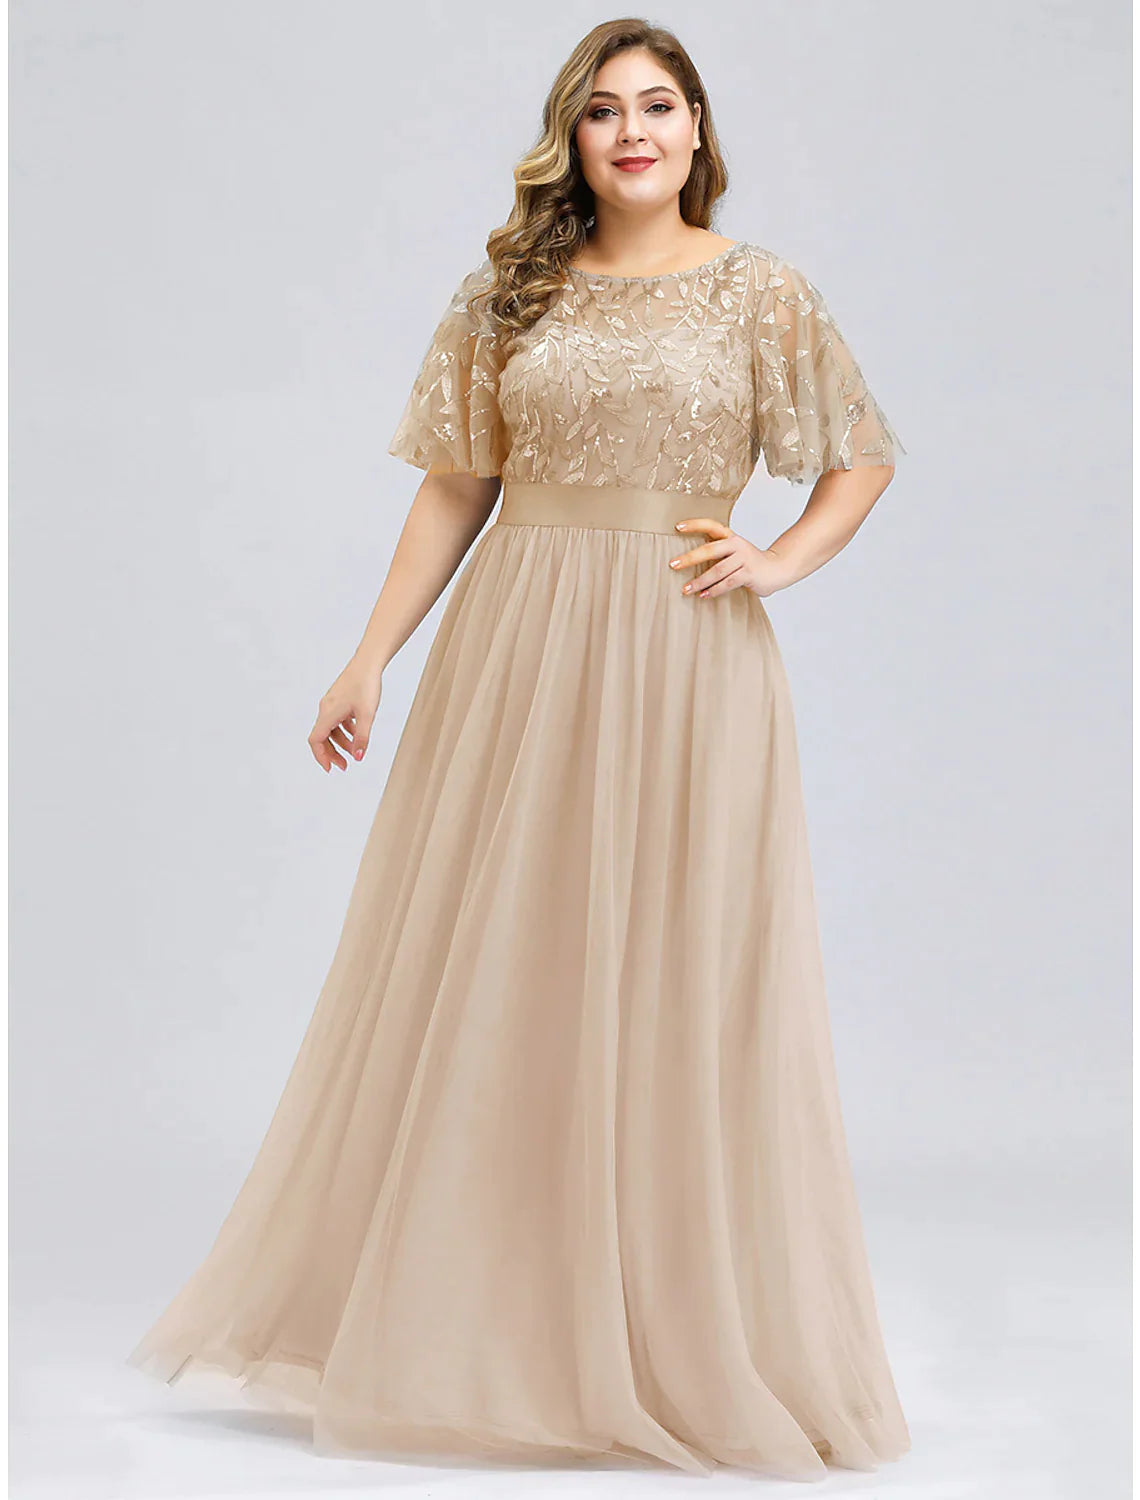 A-Line Prom Dresses Dress Wedding Guest Floor Length Short Sleeve Tulle with Sequin Appliques